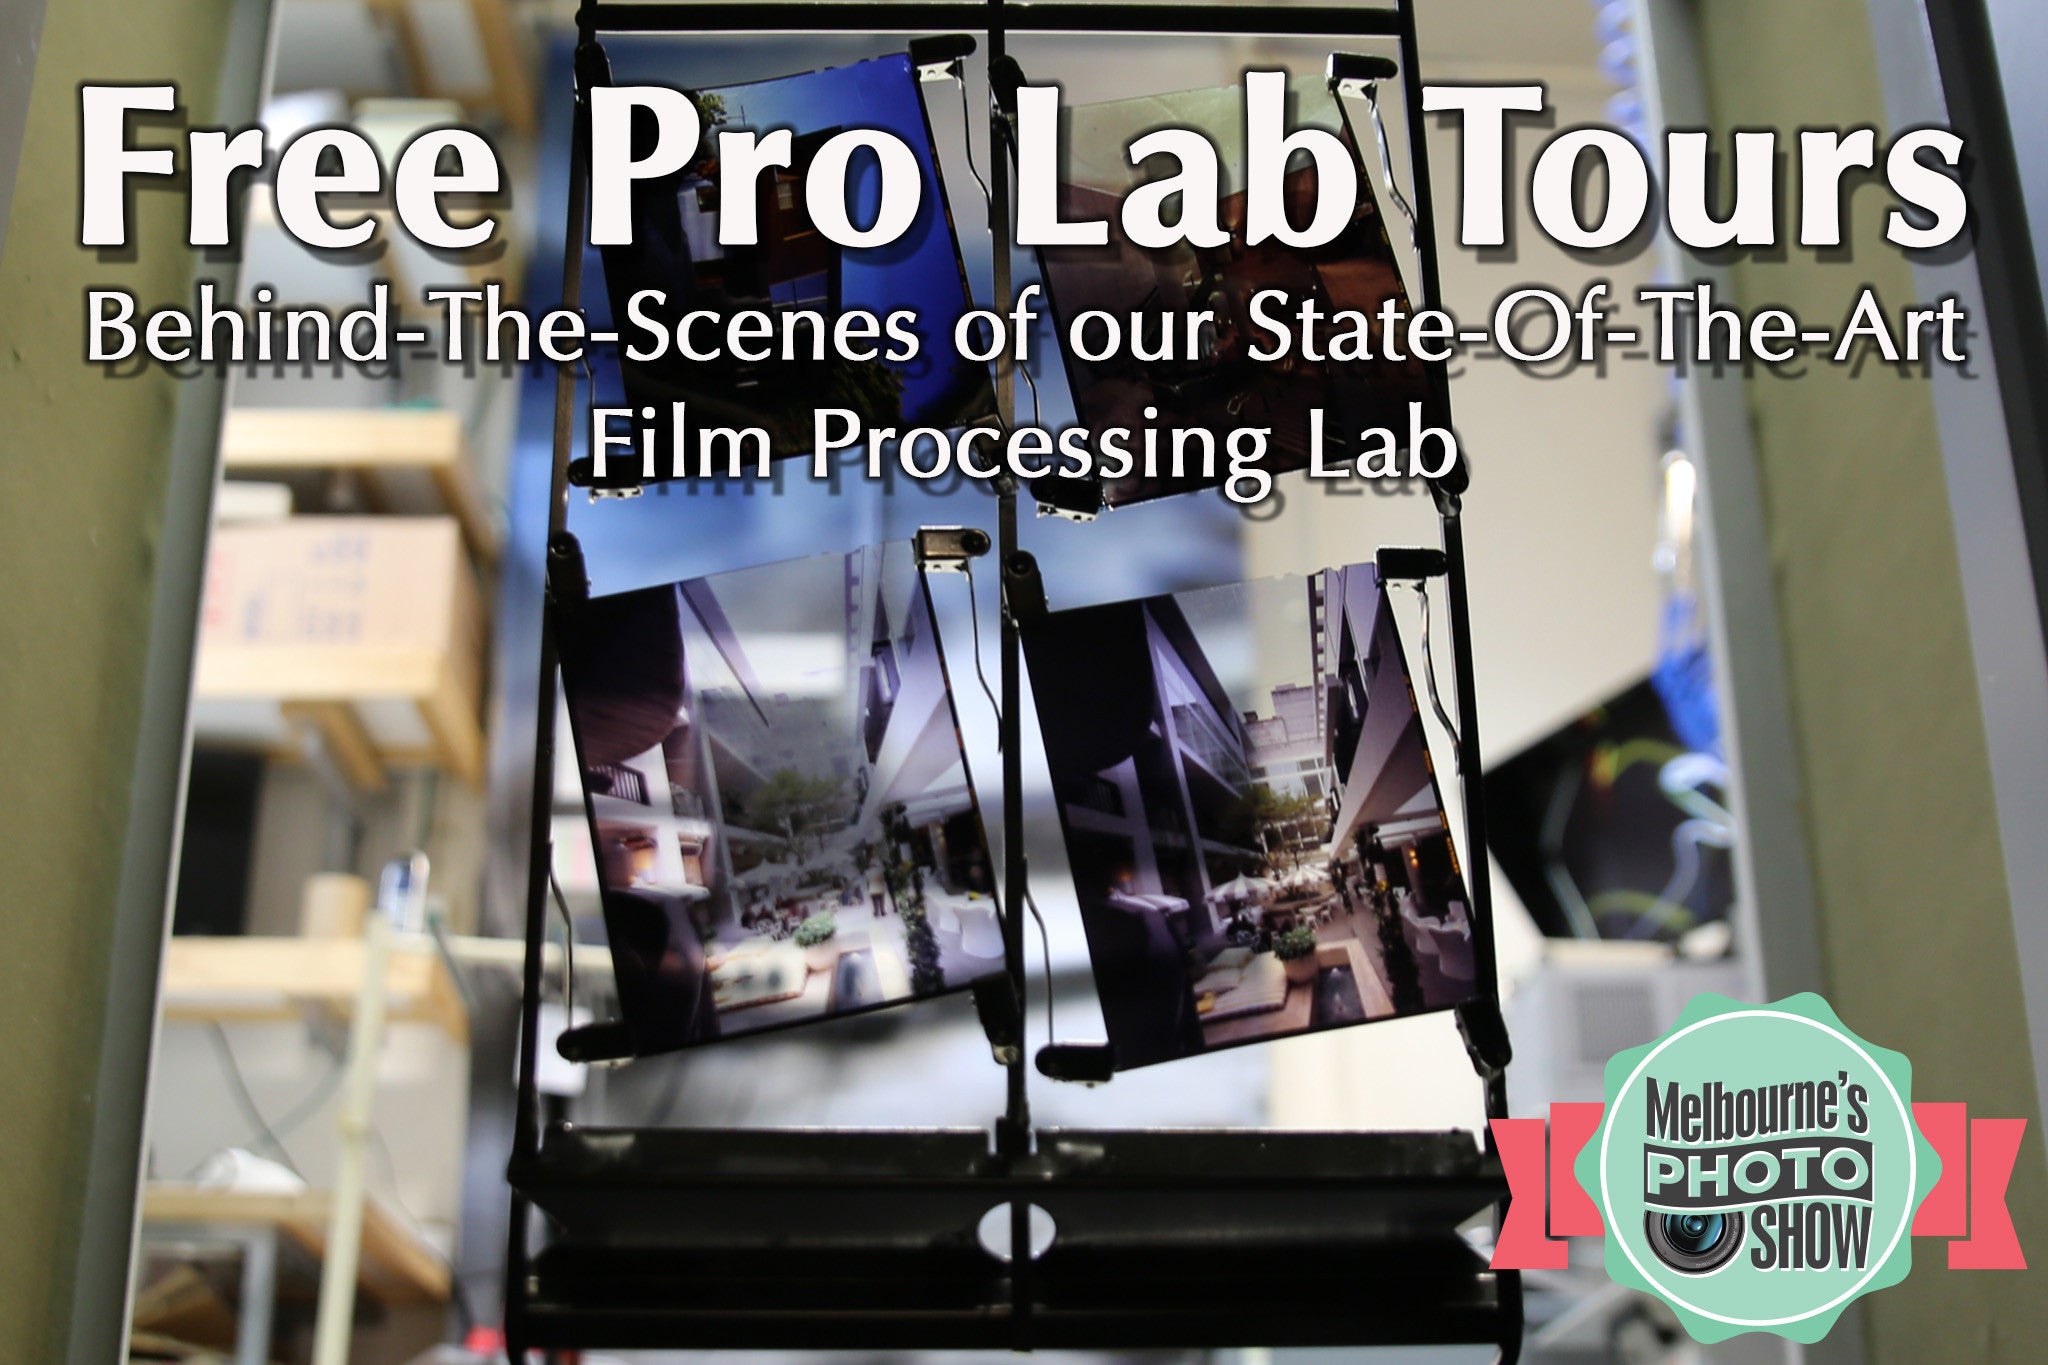 Free Pro Lab Tours - Behind-The-Scenes of our State-Of-The-Art Film Processing Lab - 2 Tours - 1pm & 2:30pm - Sat. 8th April  - Limited Numbers